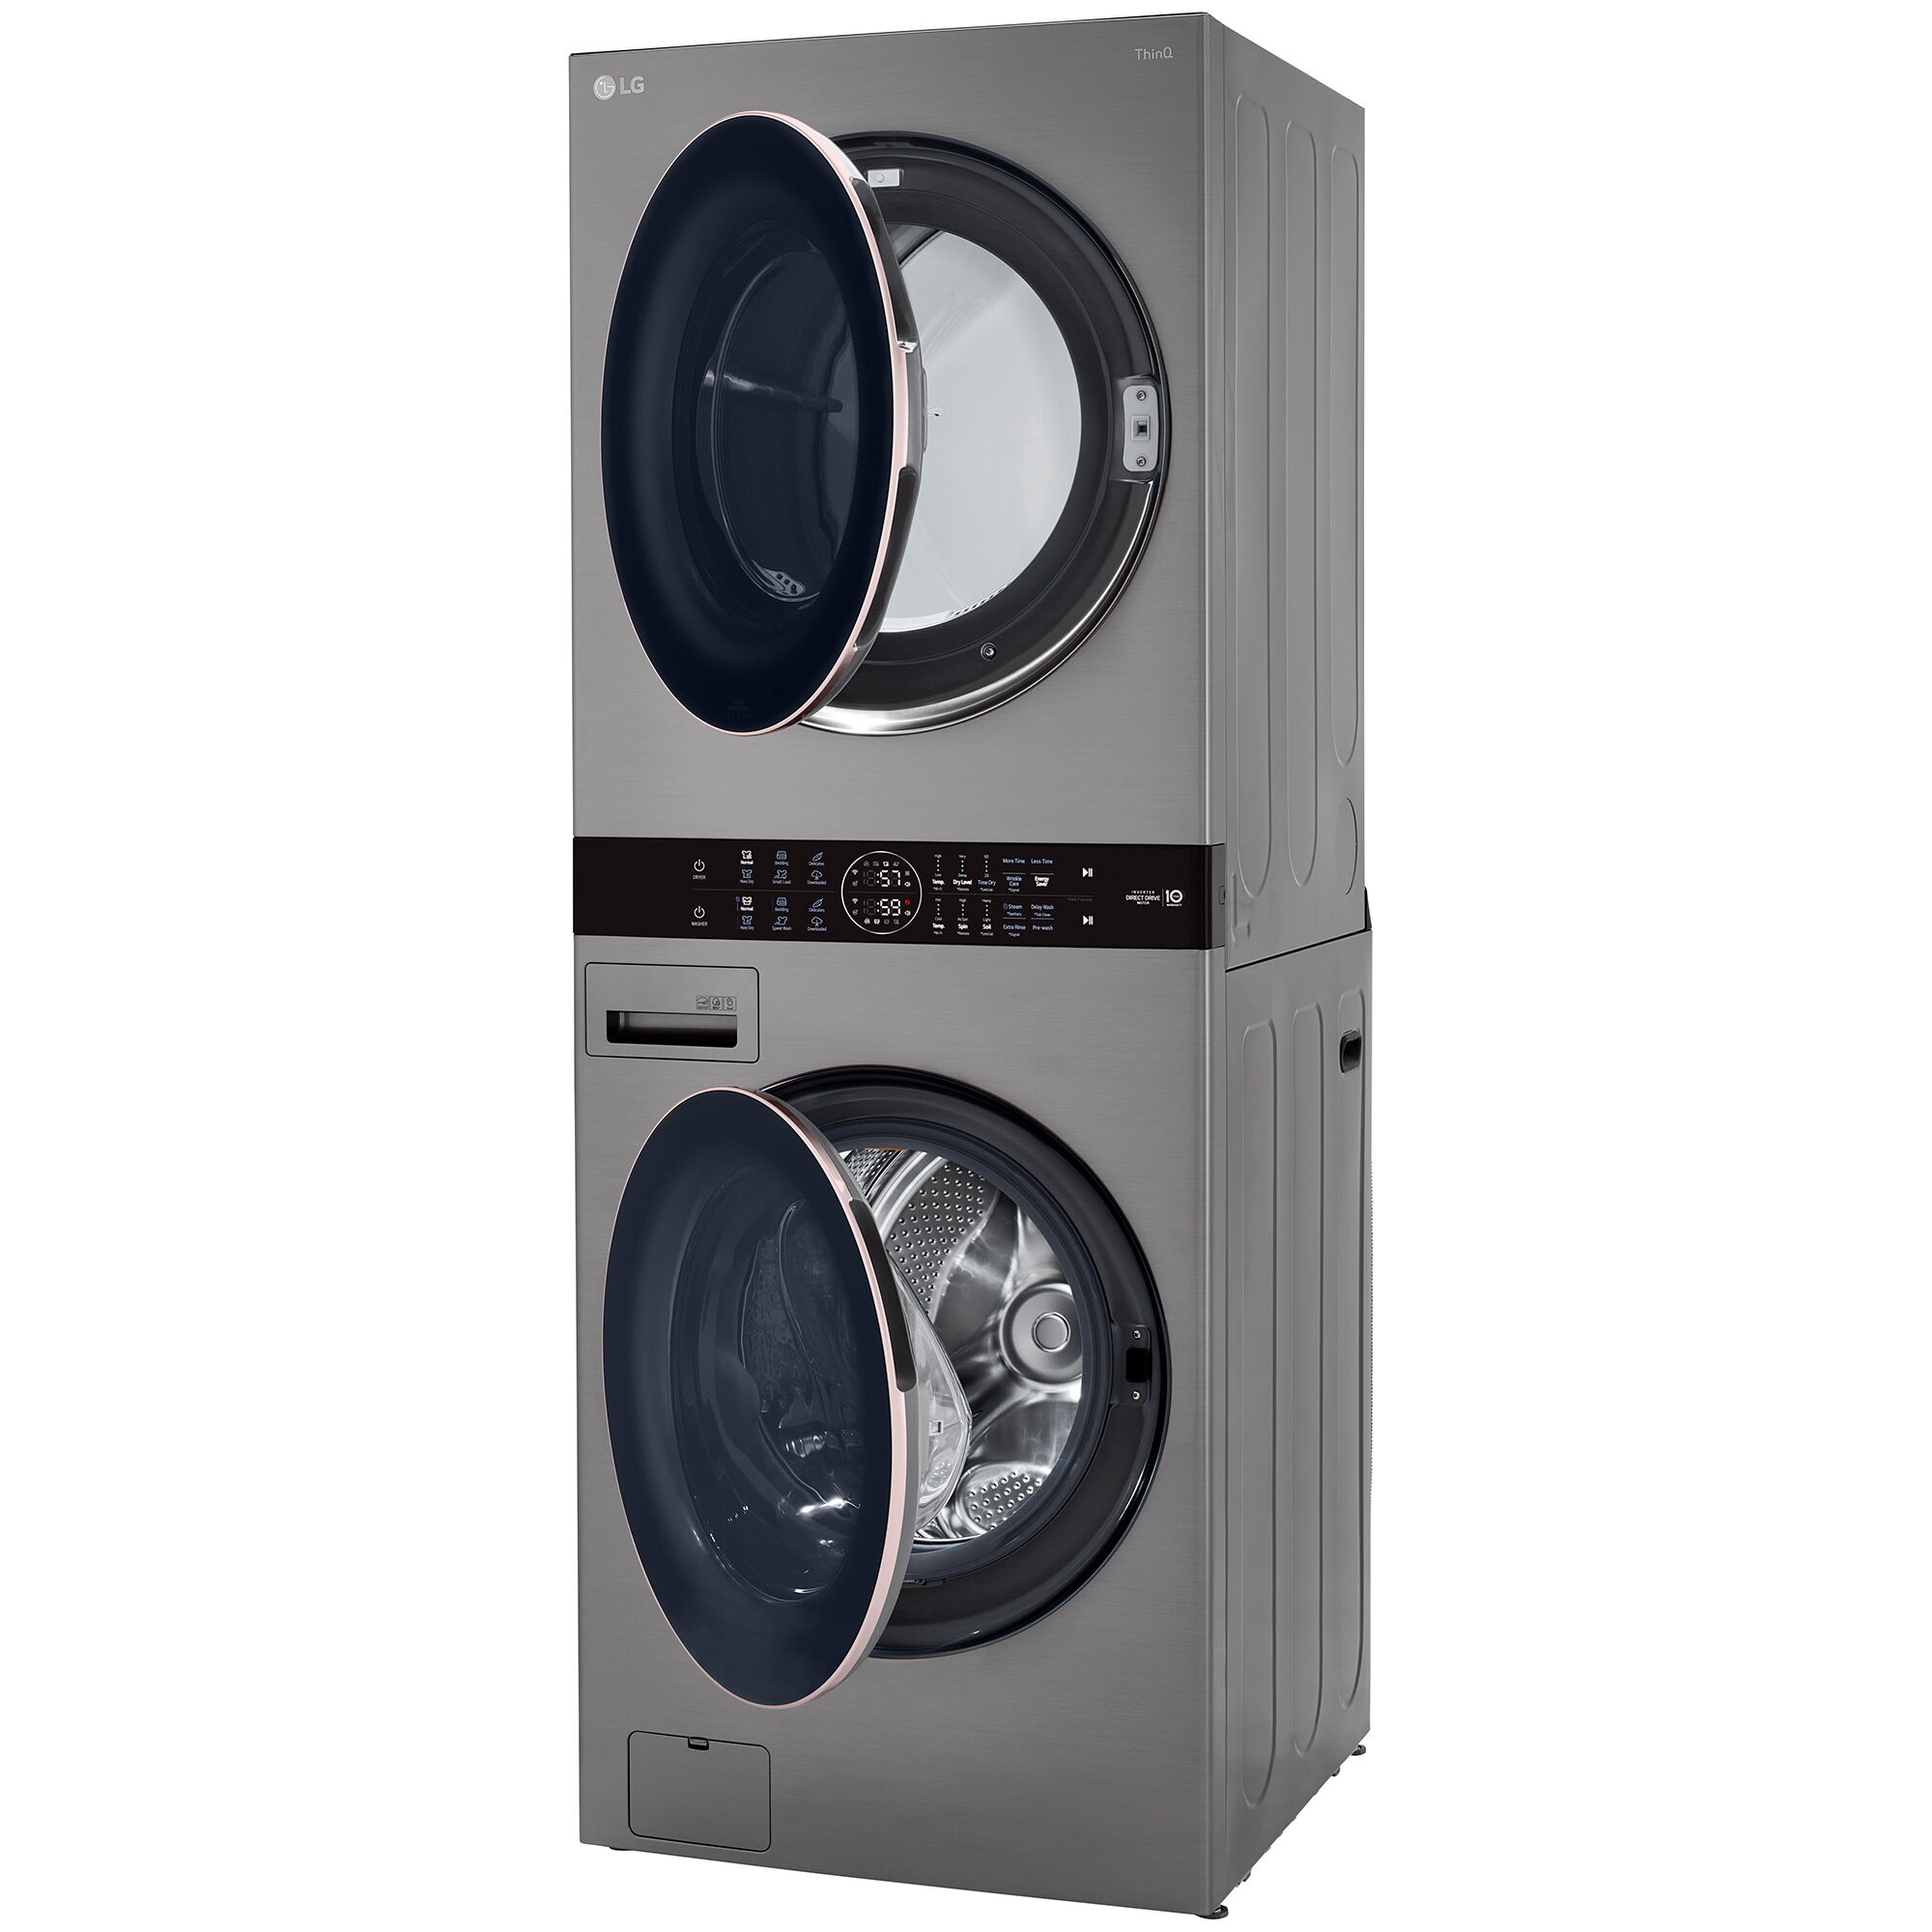 LG 27 in. WashTower with 4.5 cu. ft. Washer with 6 Wash Programs & 7.4 cu.  ft. Gas Dryer with 6 Dryer Programs, Sensor Dry & Wrinkle Care - Graphite  